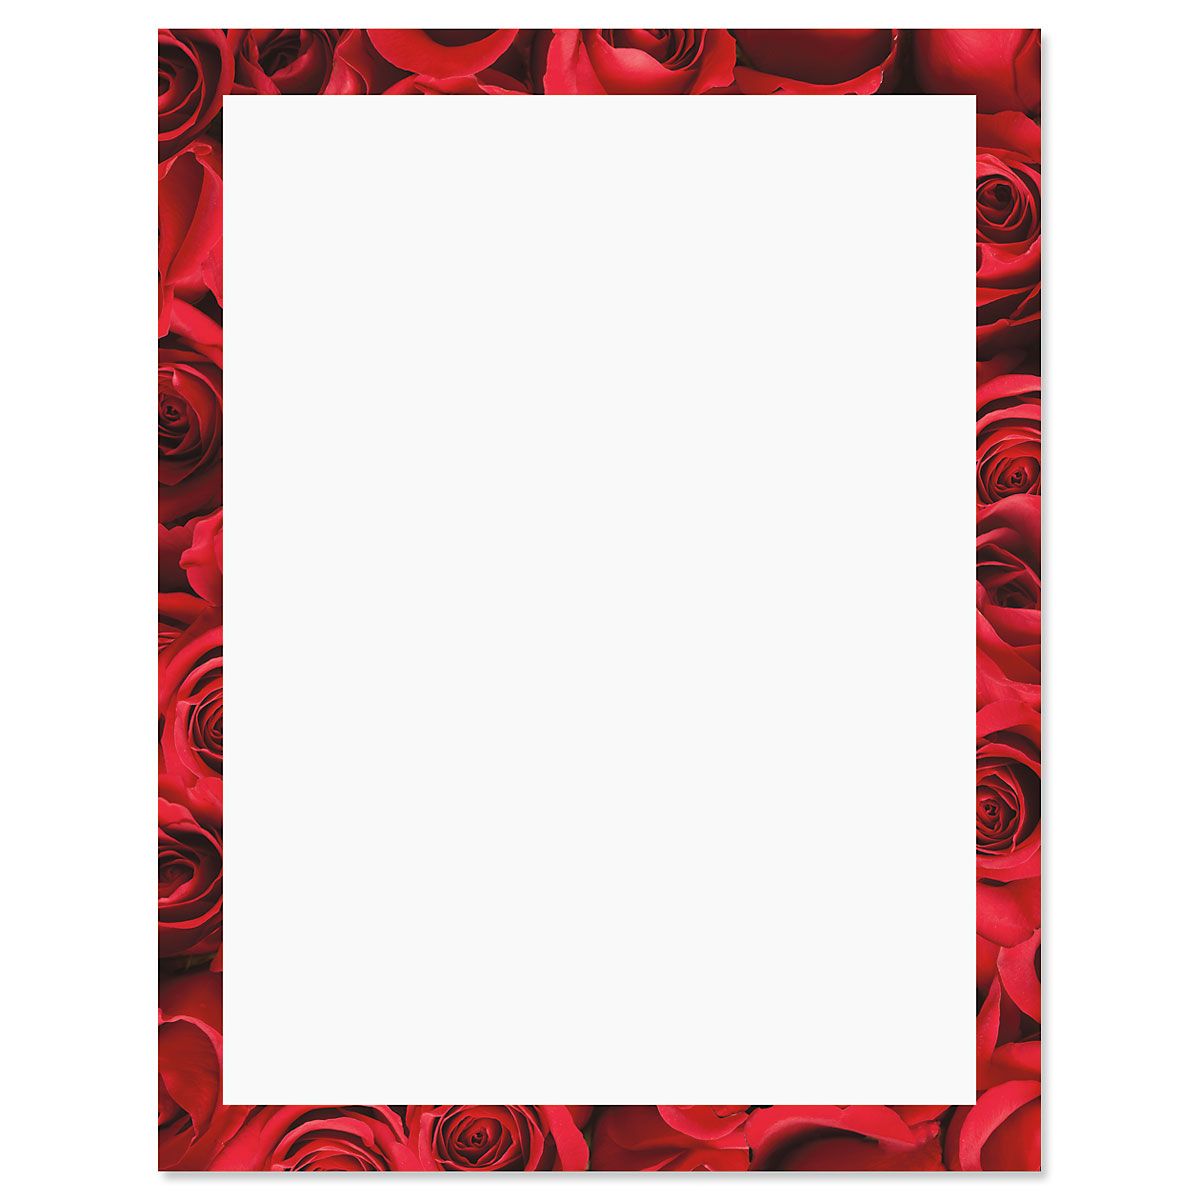 Bed of Roses Frame on White Valentine's Day Letter Papers